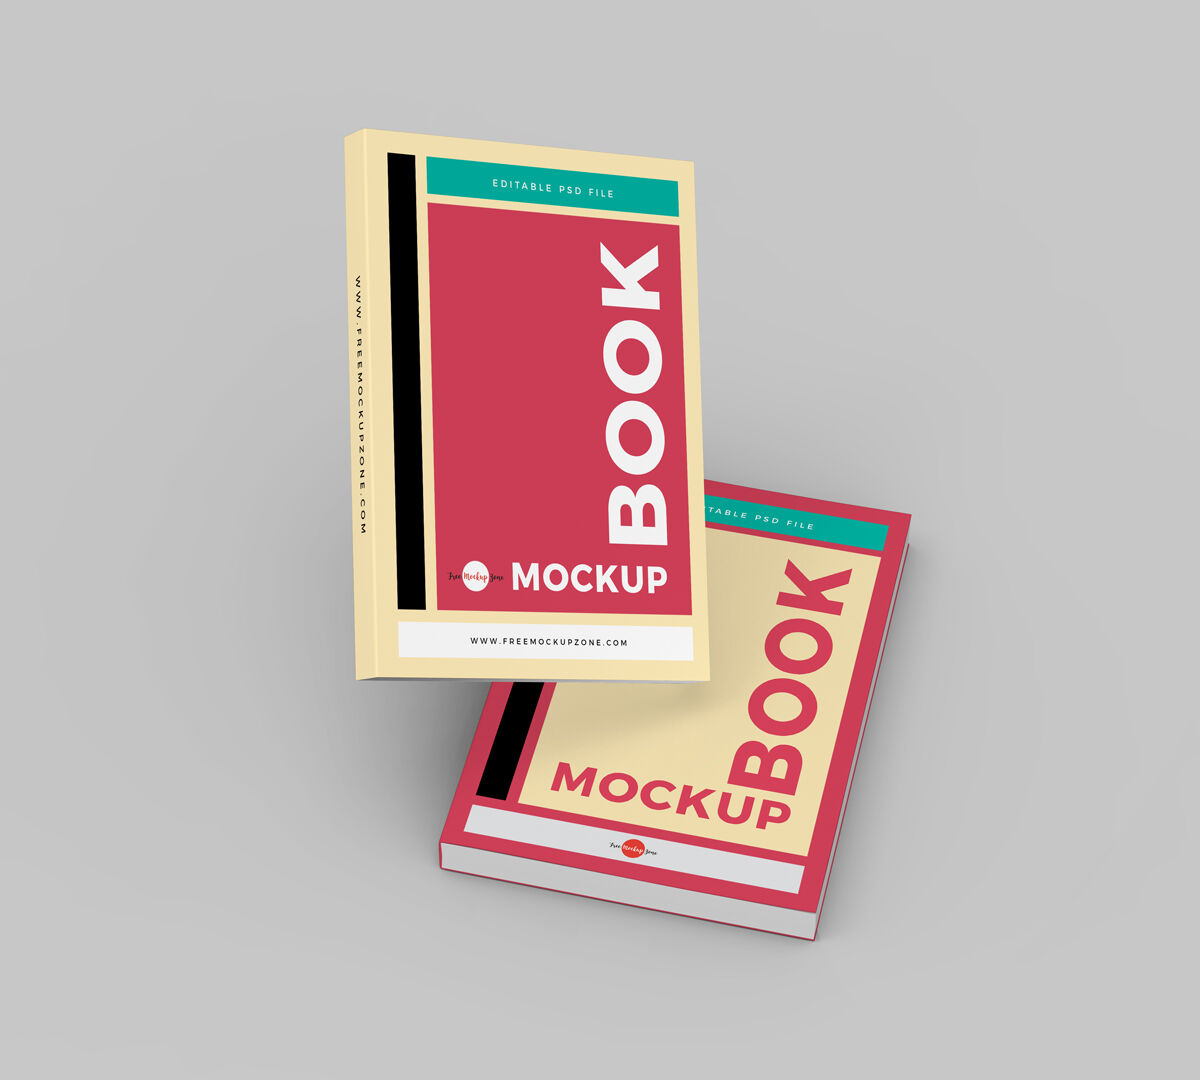 Two Floating Book Cover Mockup FREE PSD